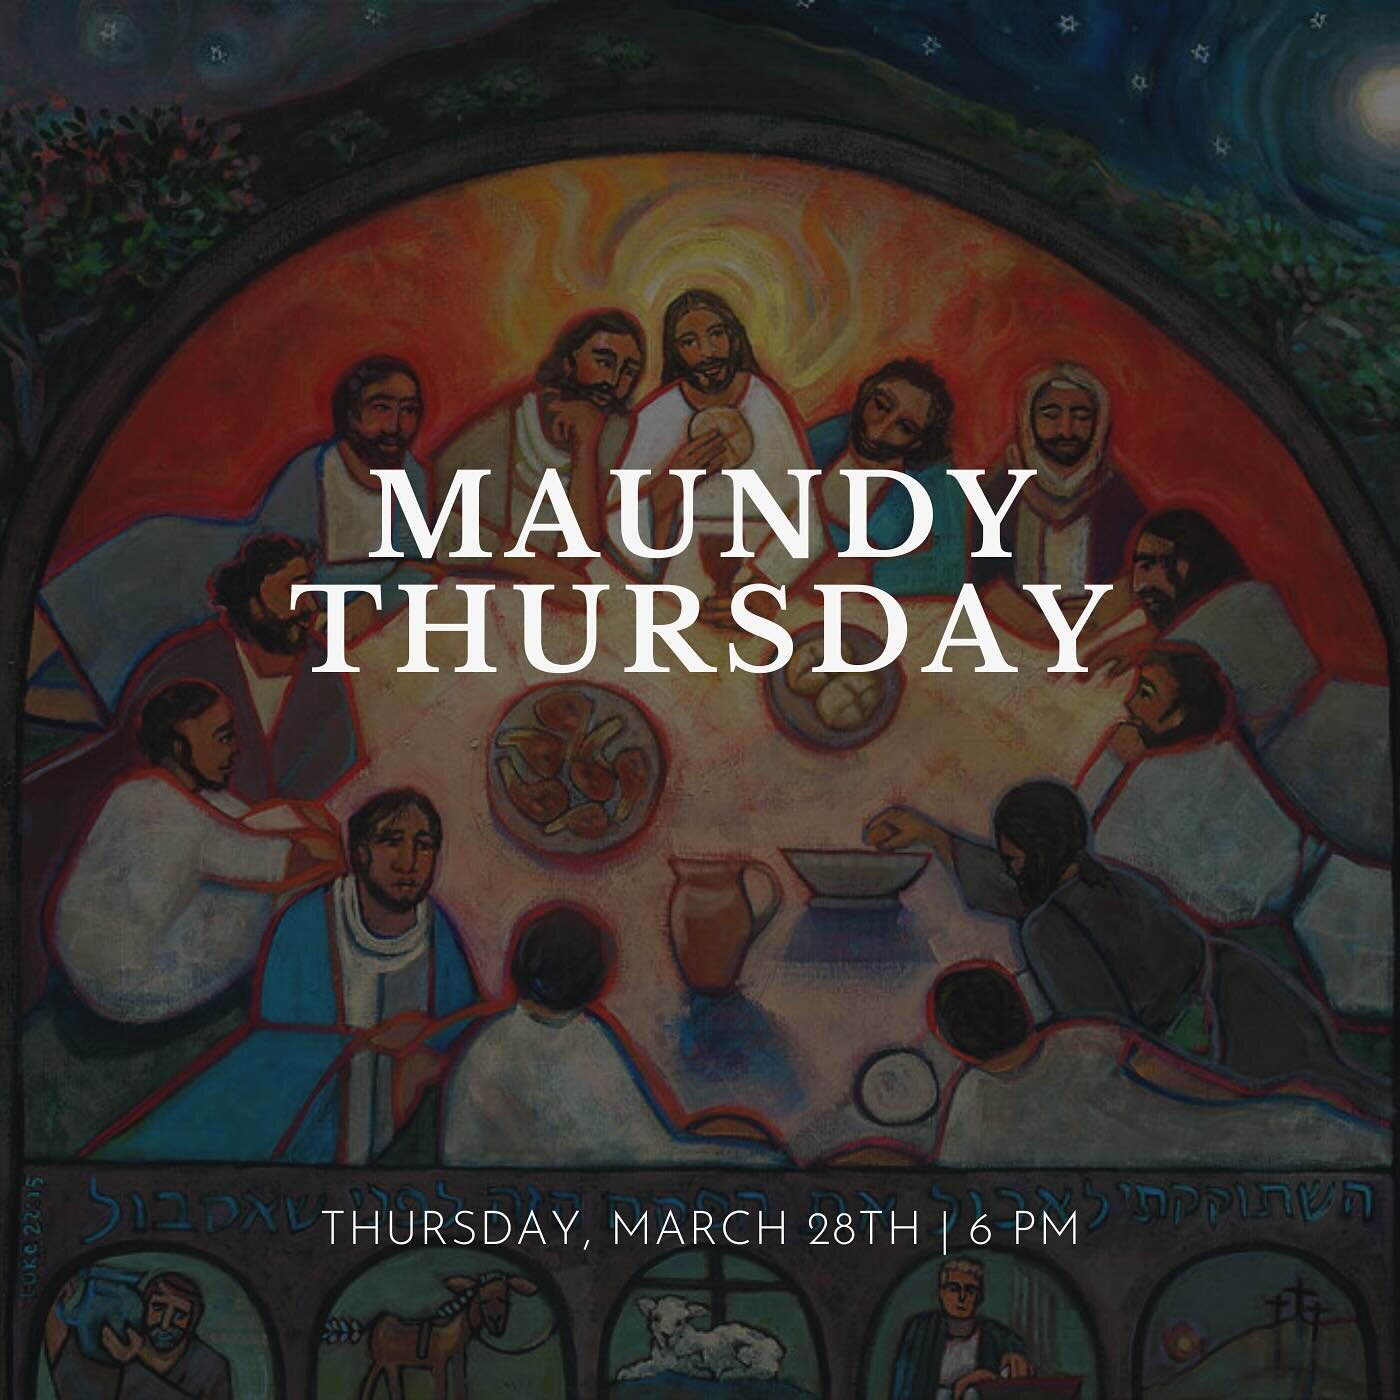 Maundy Thursday receives its name from the&nbsp;mandatum&nbsp;(commandment) given by our Lord: &ldquo;A new commandment I give to you, that you love one another: just as I have loved you, you also are to love one another&rdquo; (Jn 13:34). At the Las